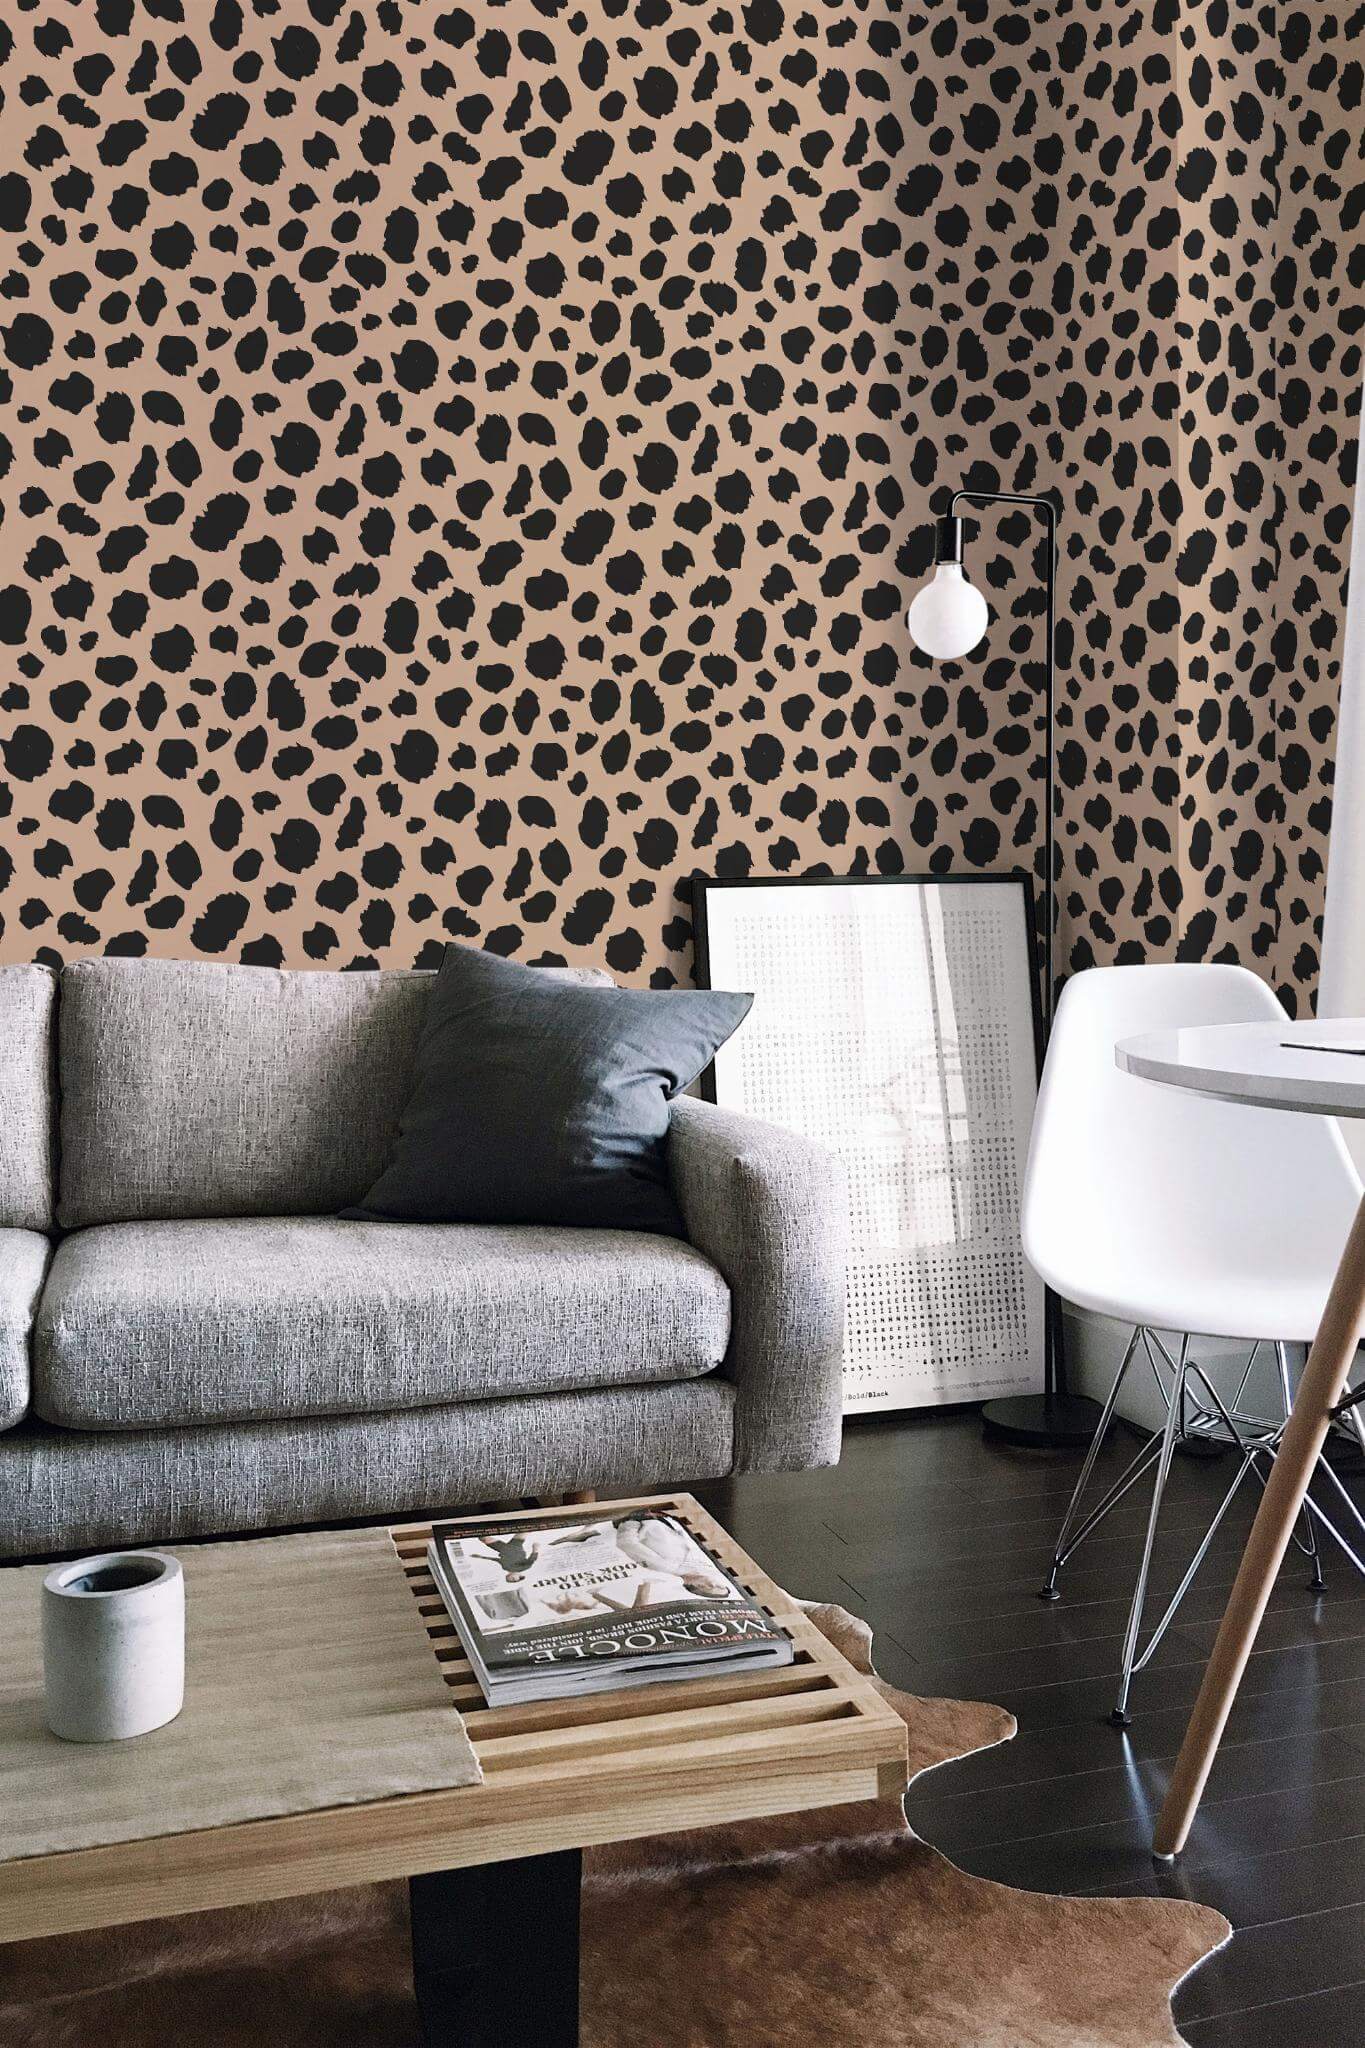 Colorful Painted Cheetah Print Removable Peel And Stick Wallpaper